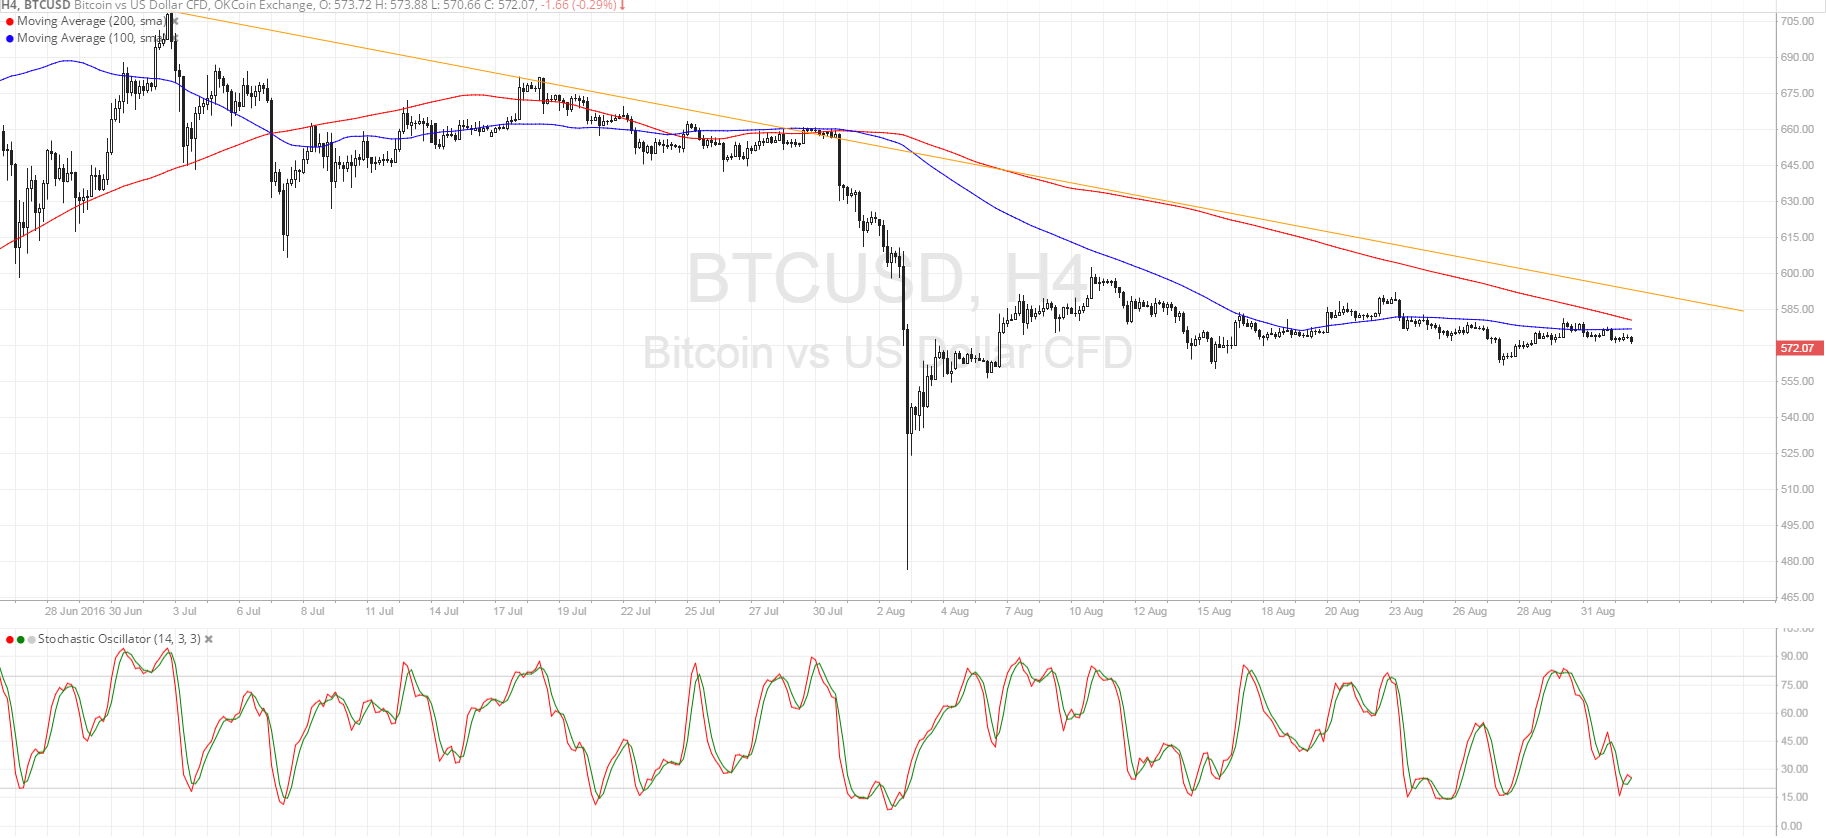 Bitcoin Price Technical Analysis for 09/02/2016 - Make or Break